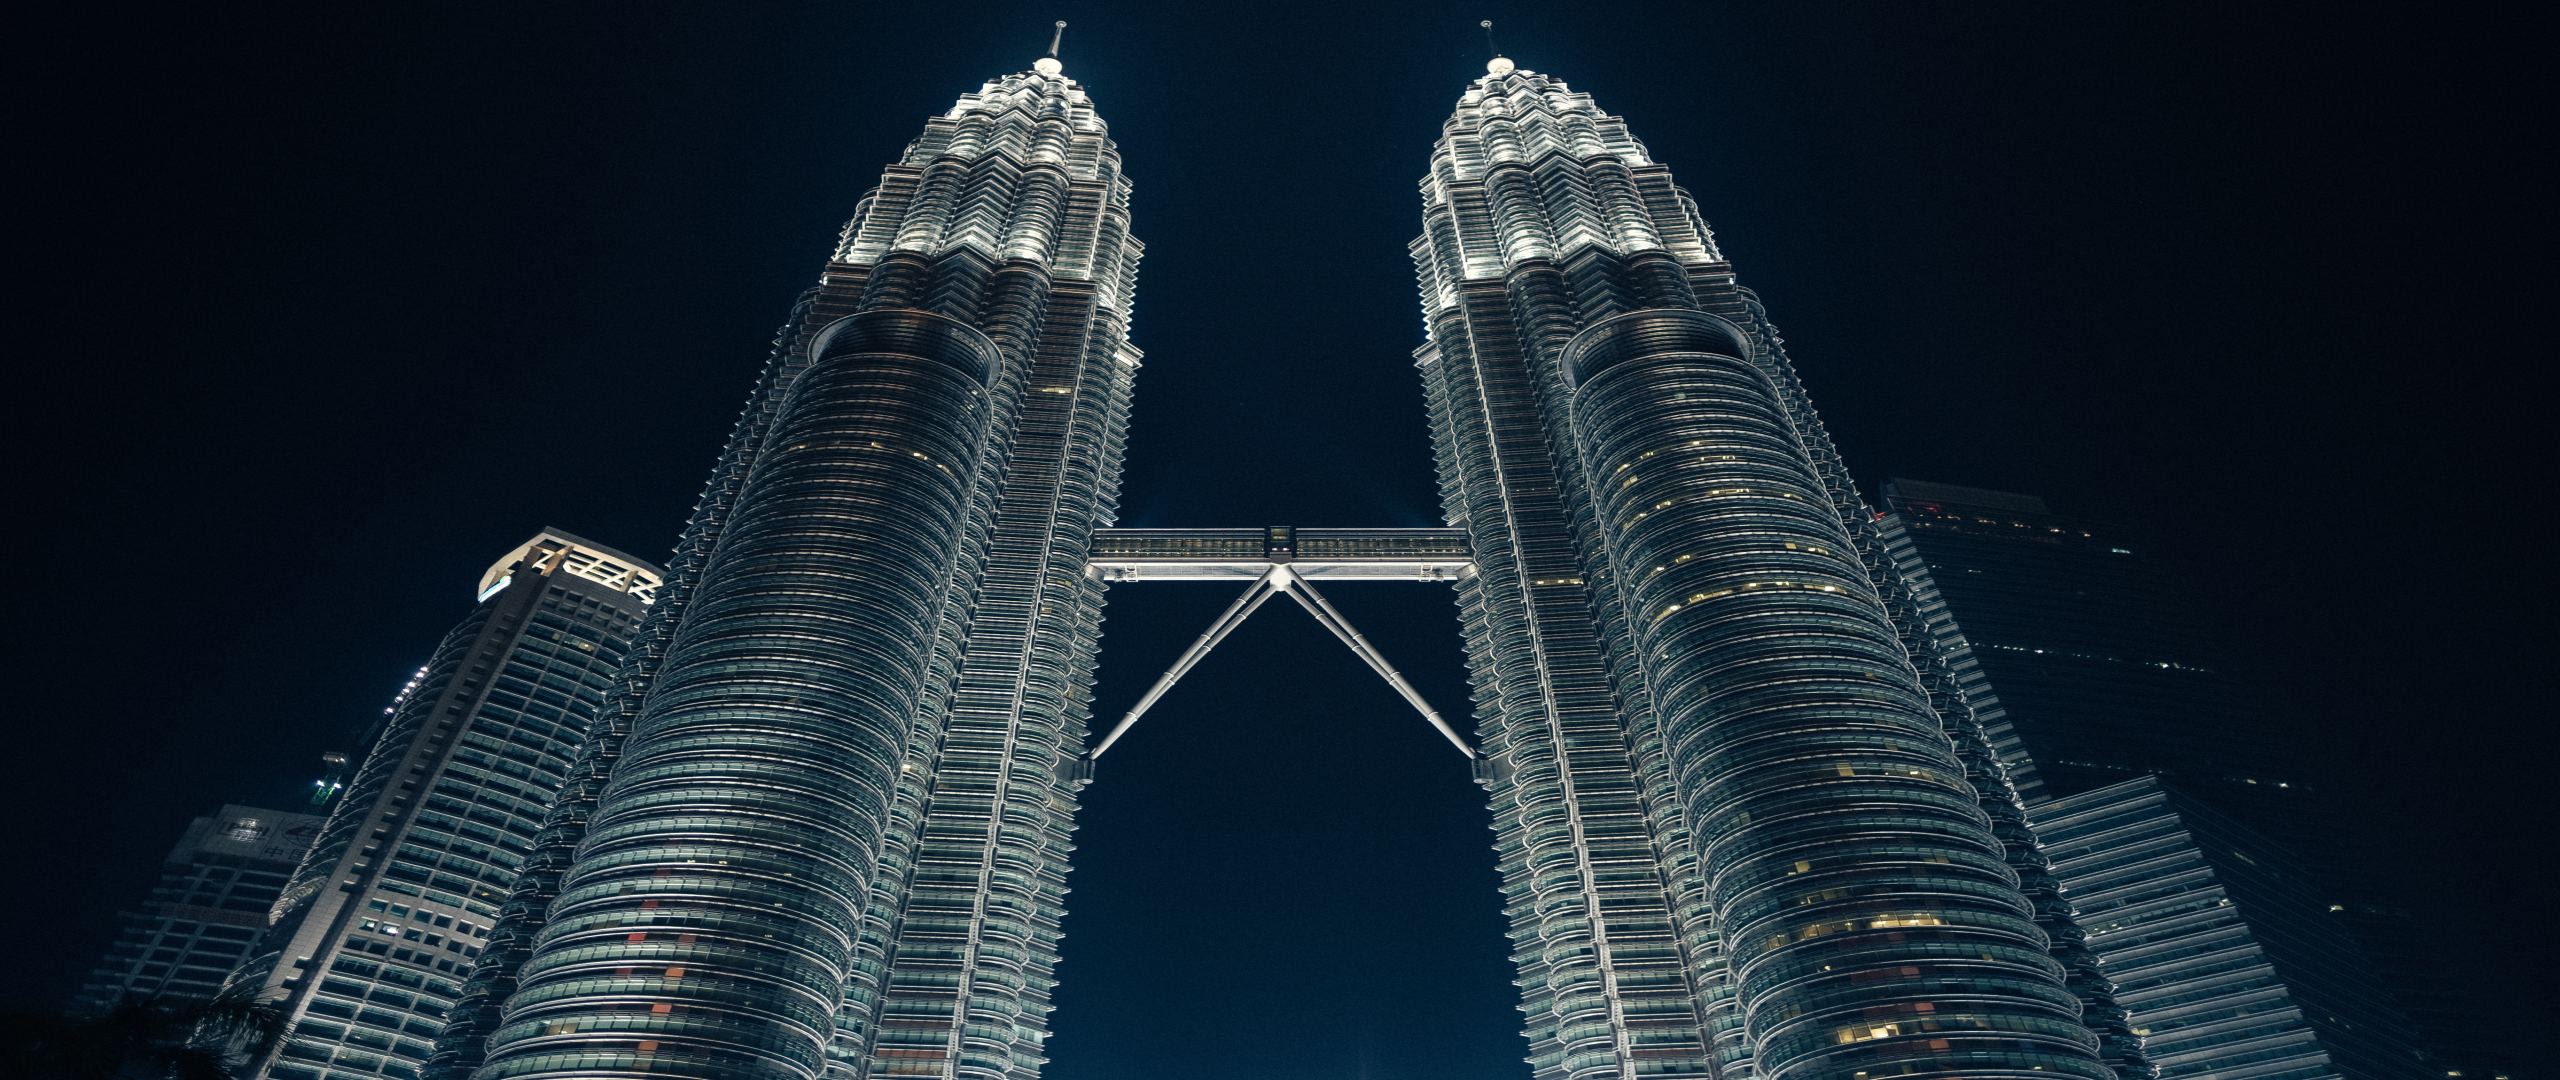 Image of twin building towers at an oblique angle